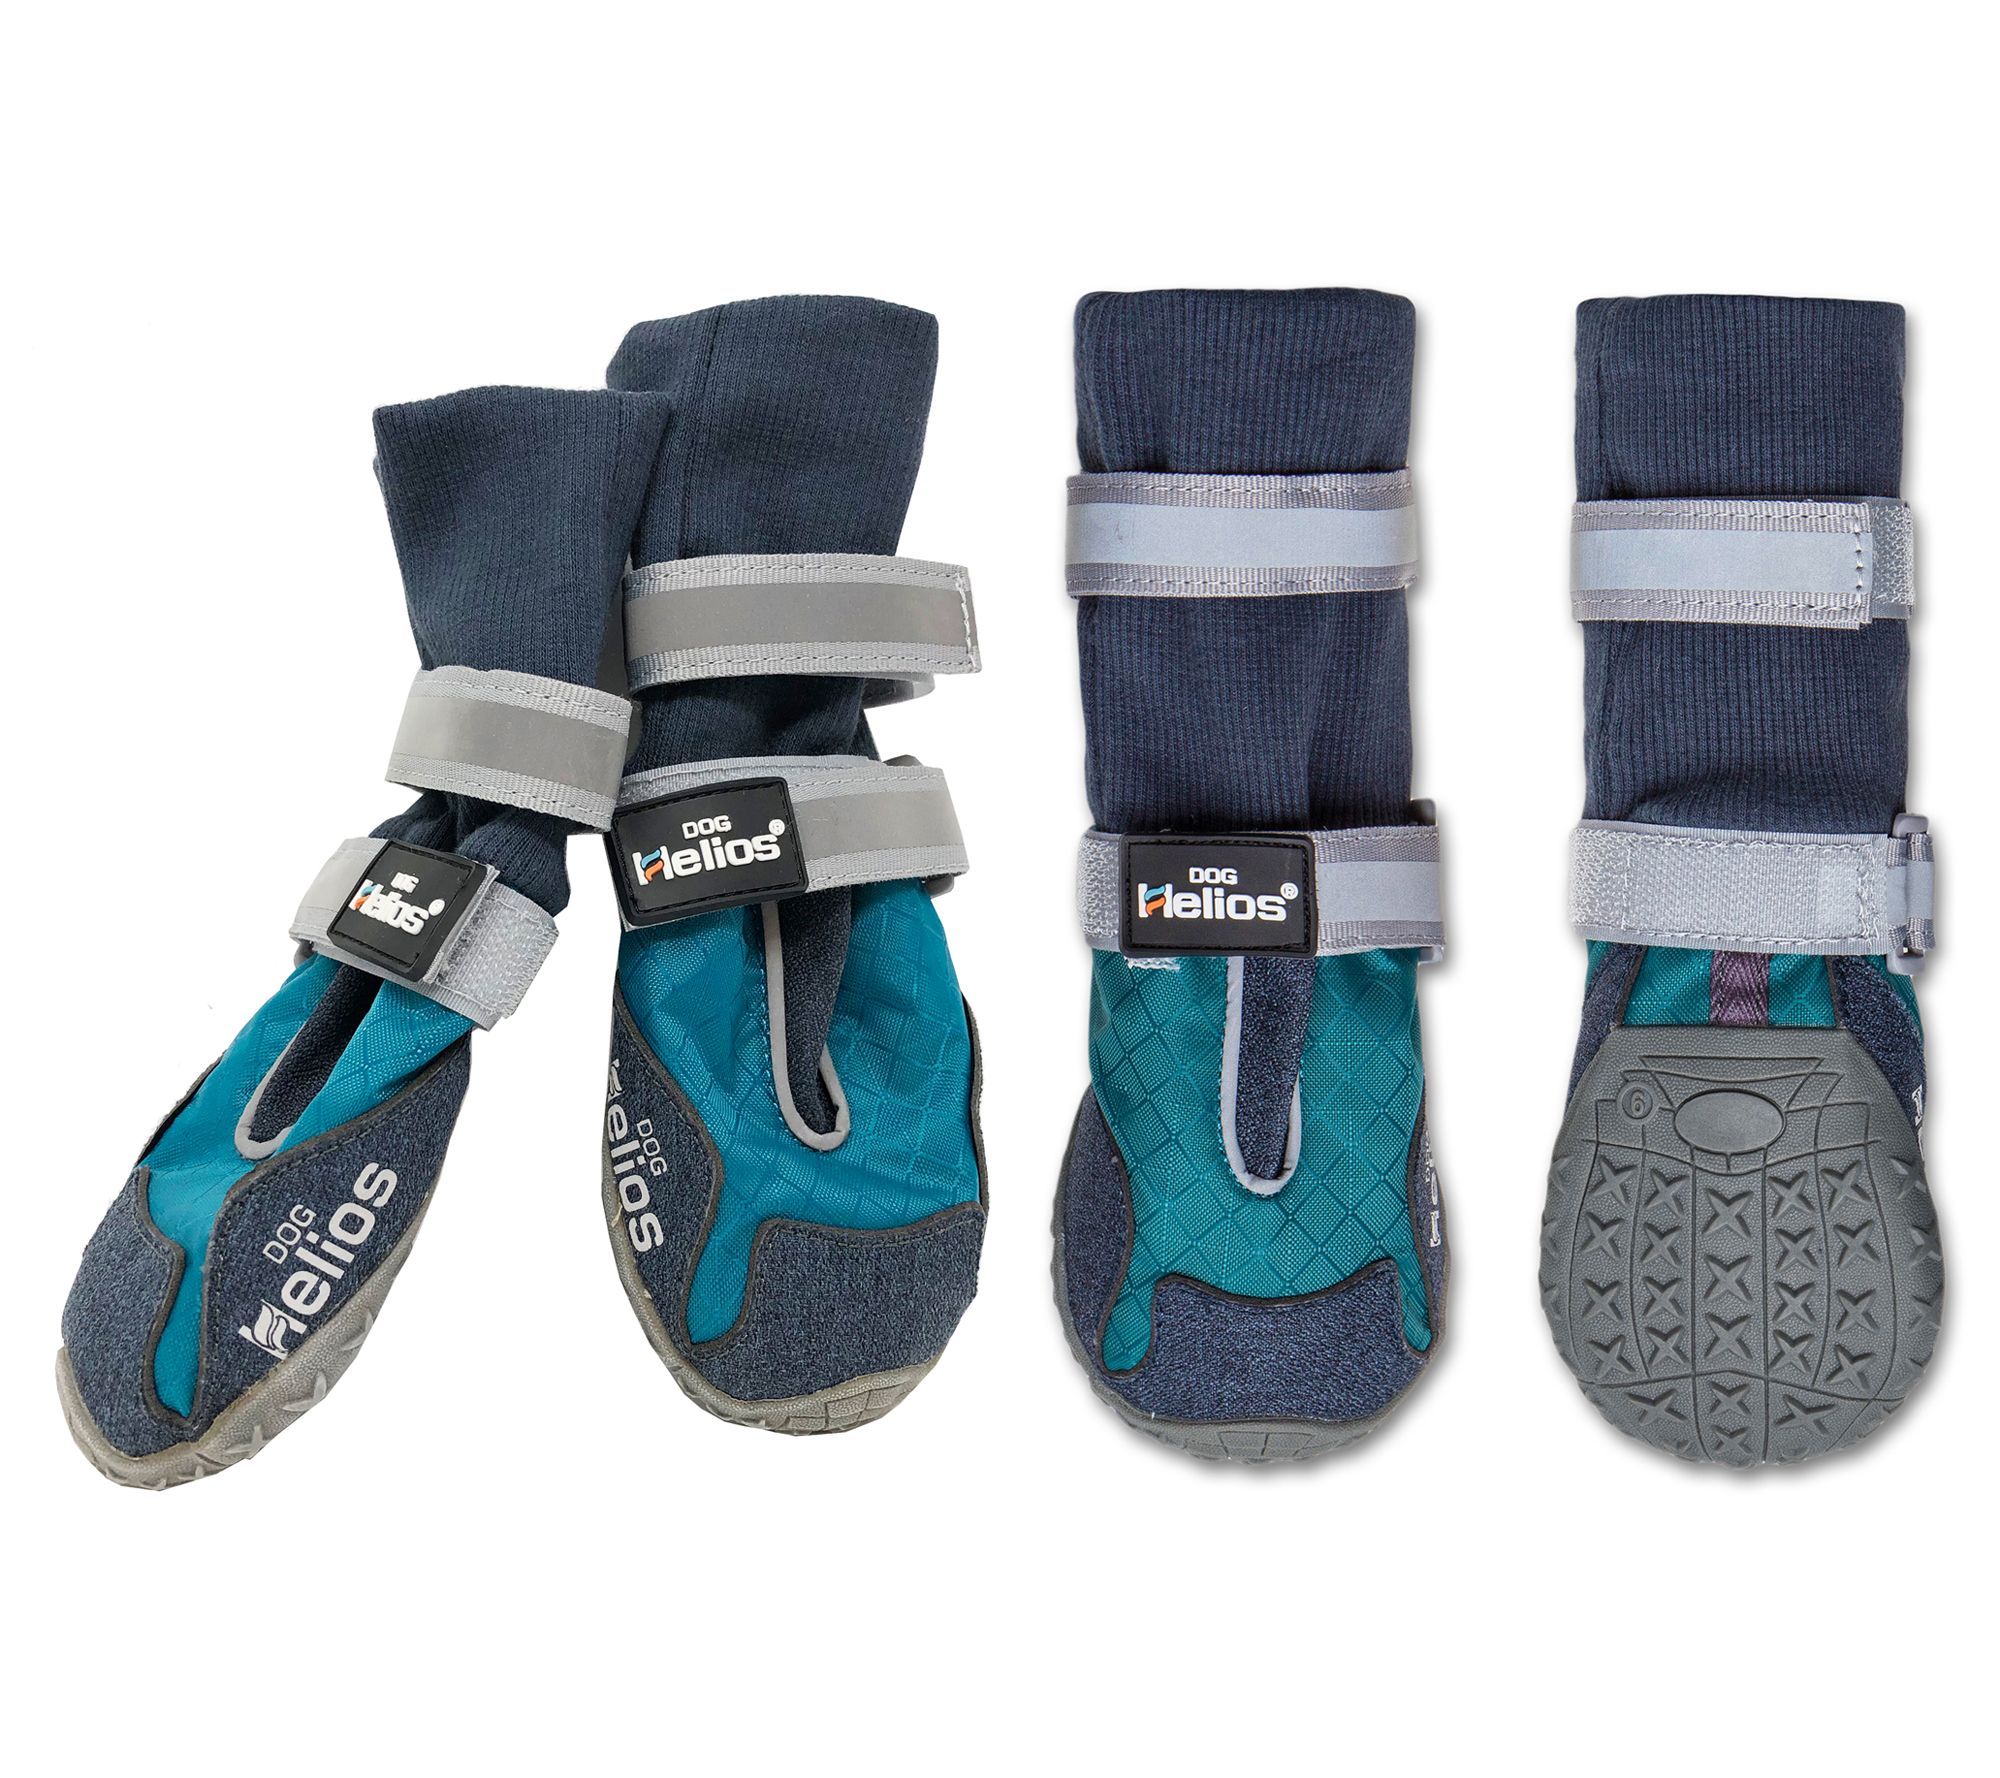 Dog Helios Traverse Premium Grip High-Ankle Out door Dog Boots - QVC.com